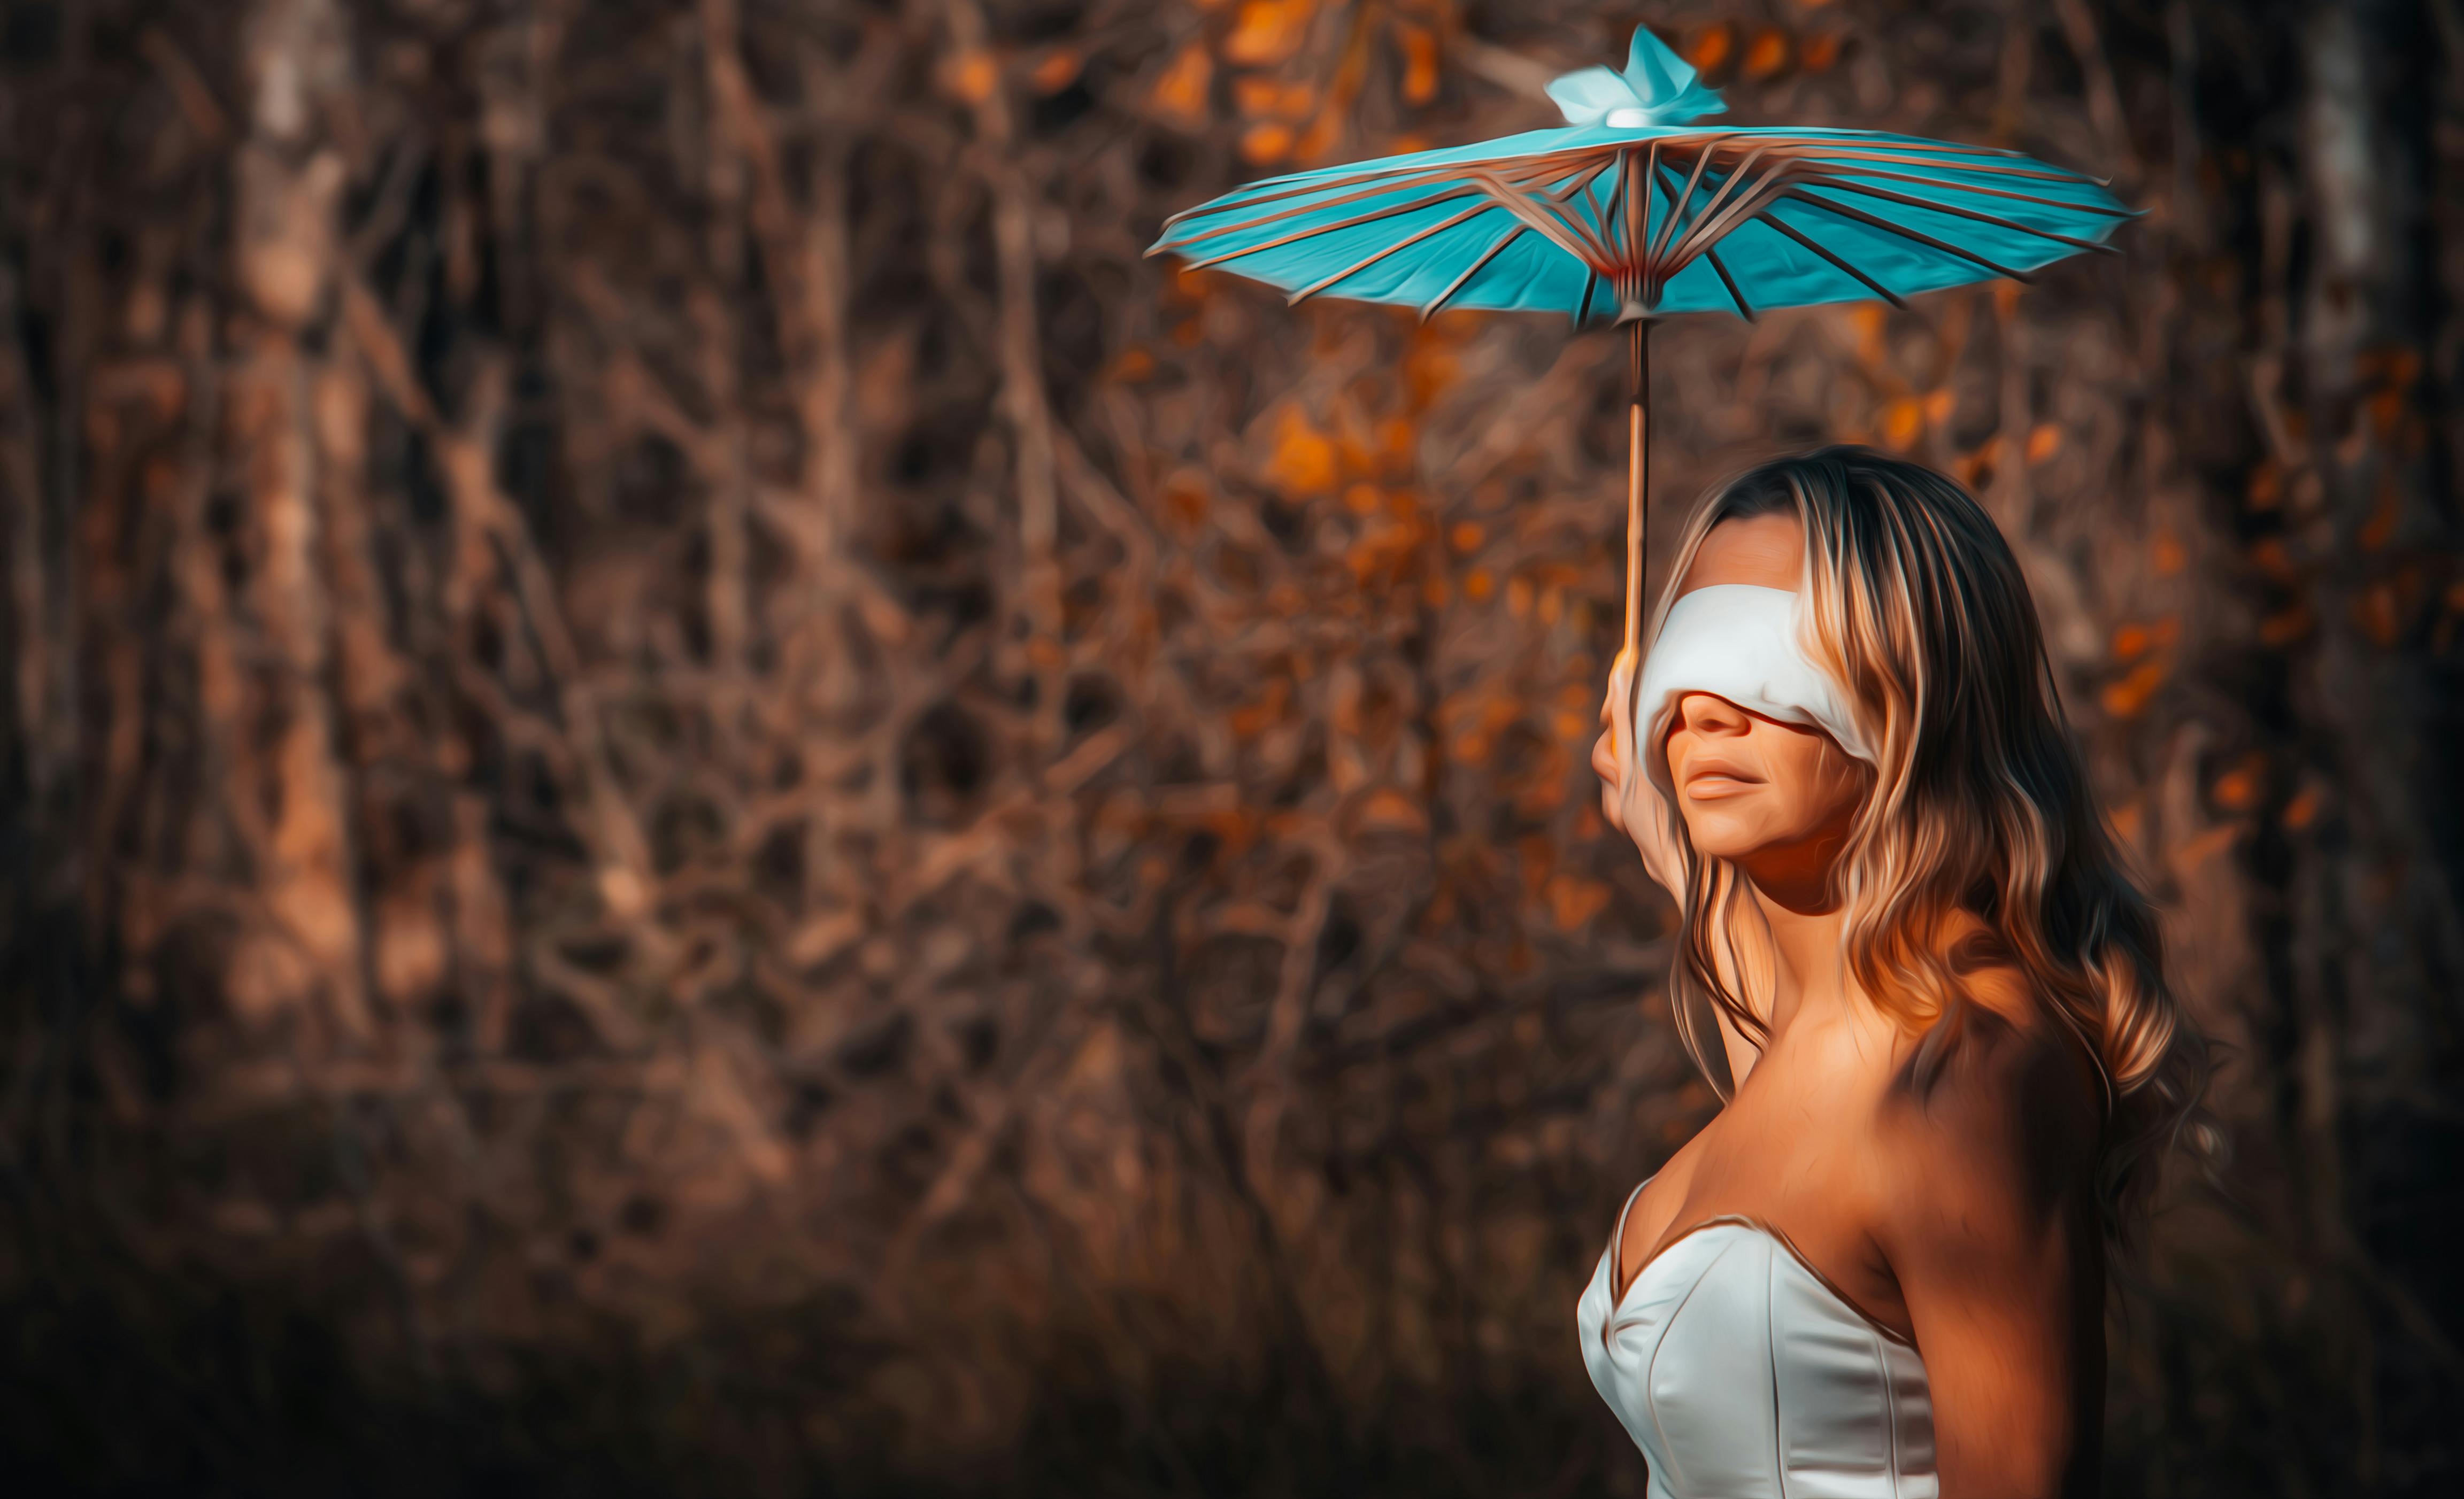 Blindfolded woman, red, Blindfolded, woman, girl, HD wallpaper